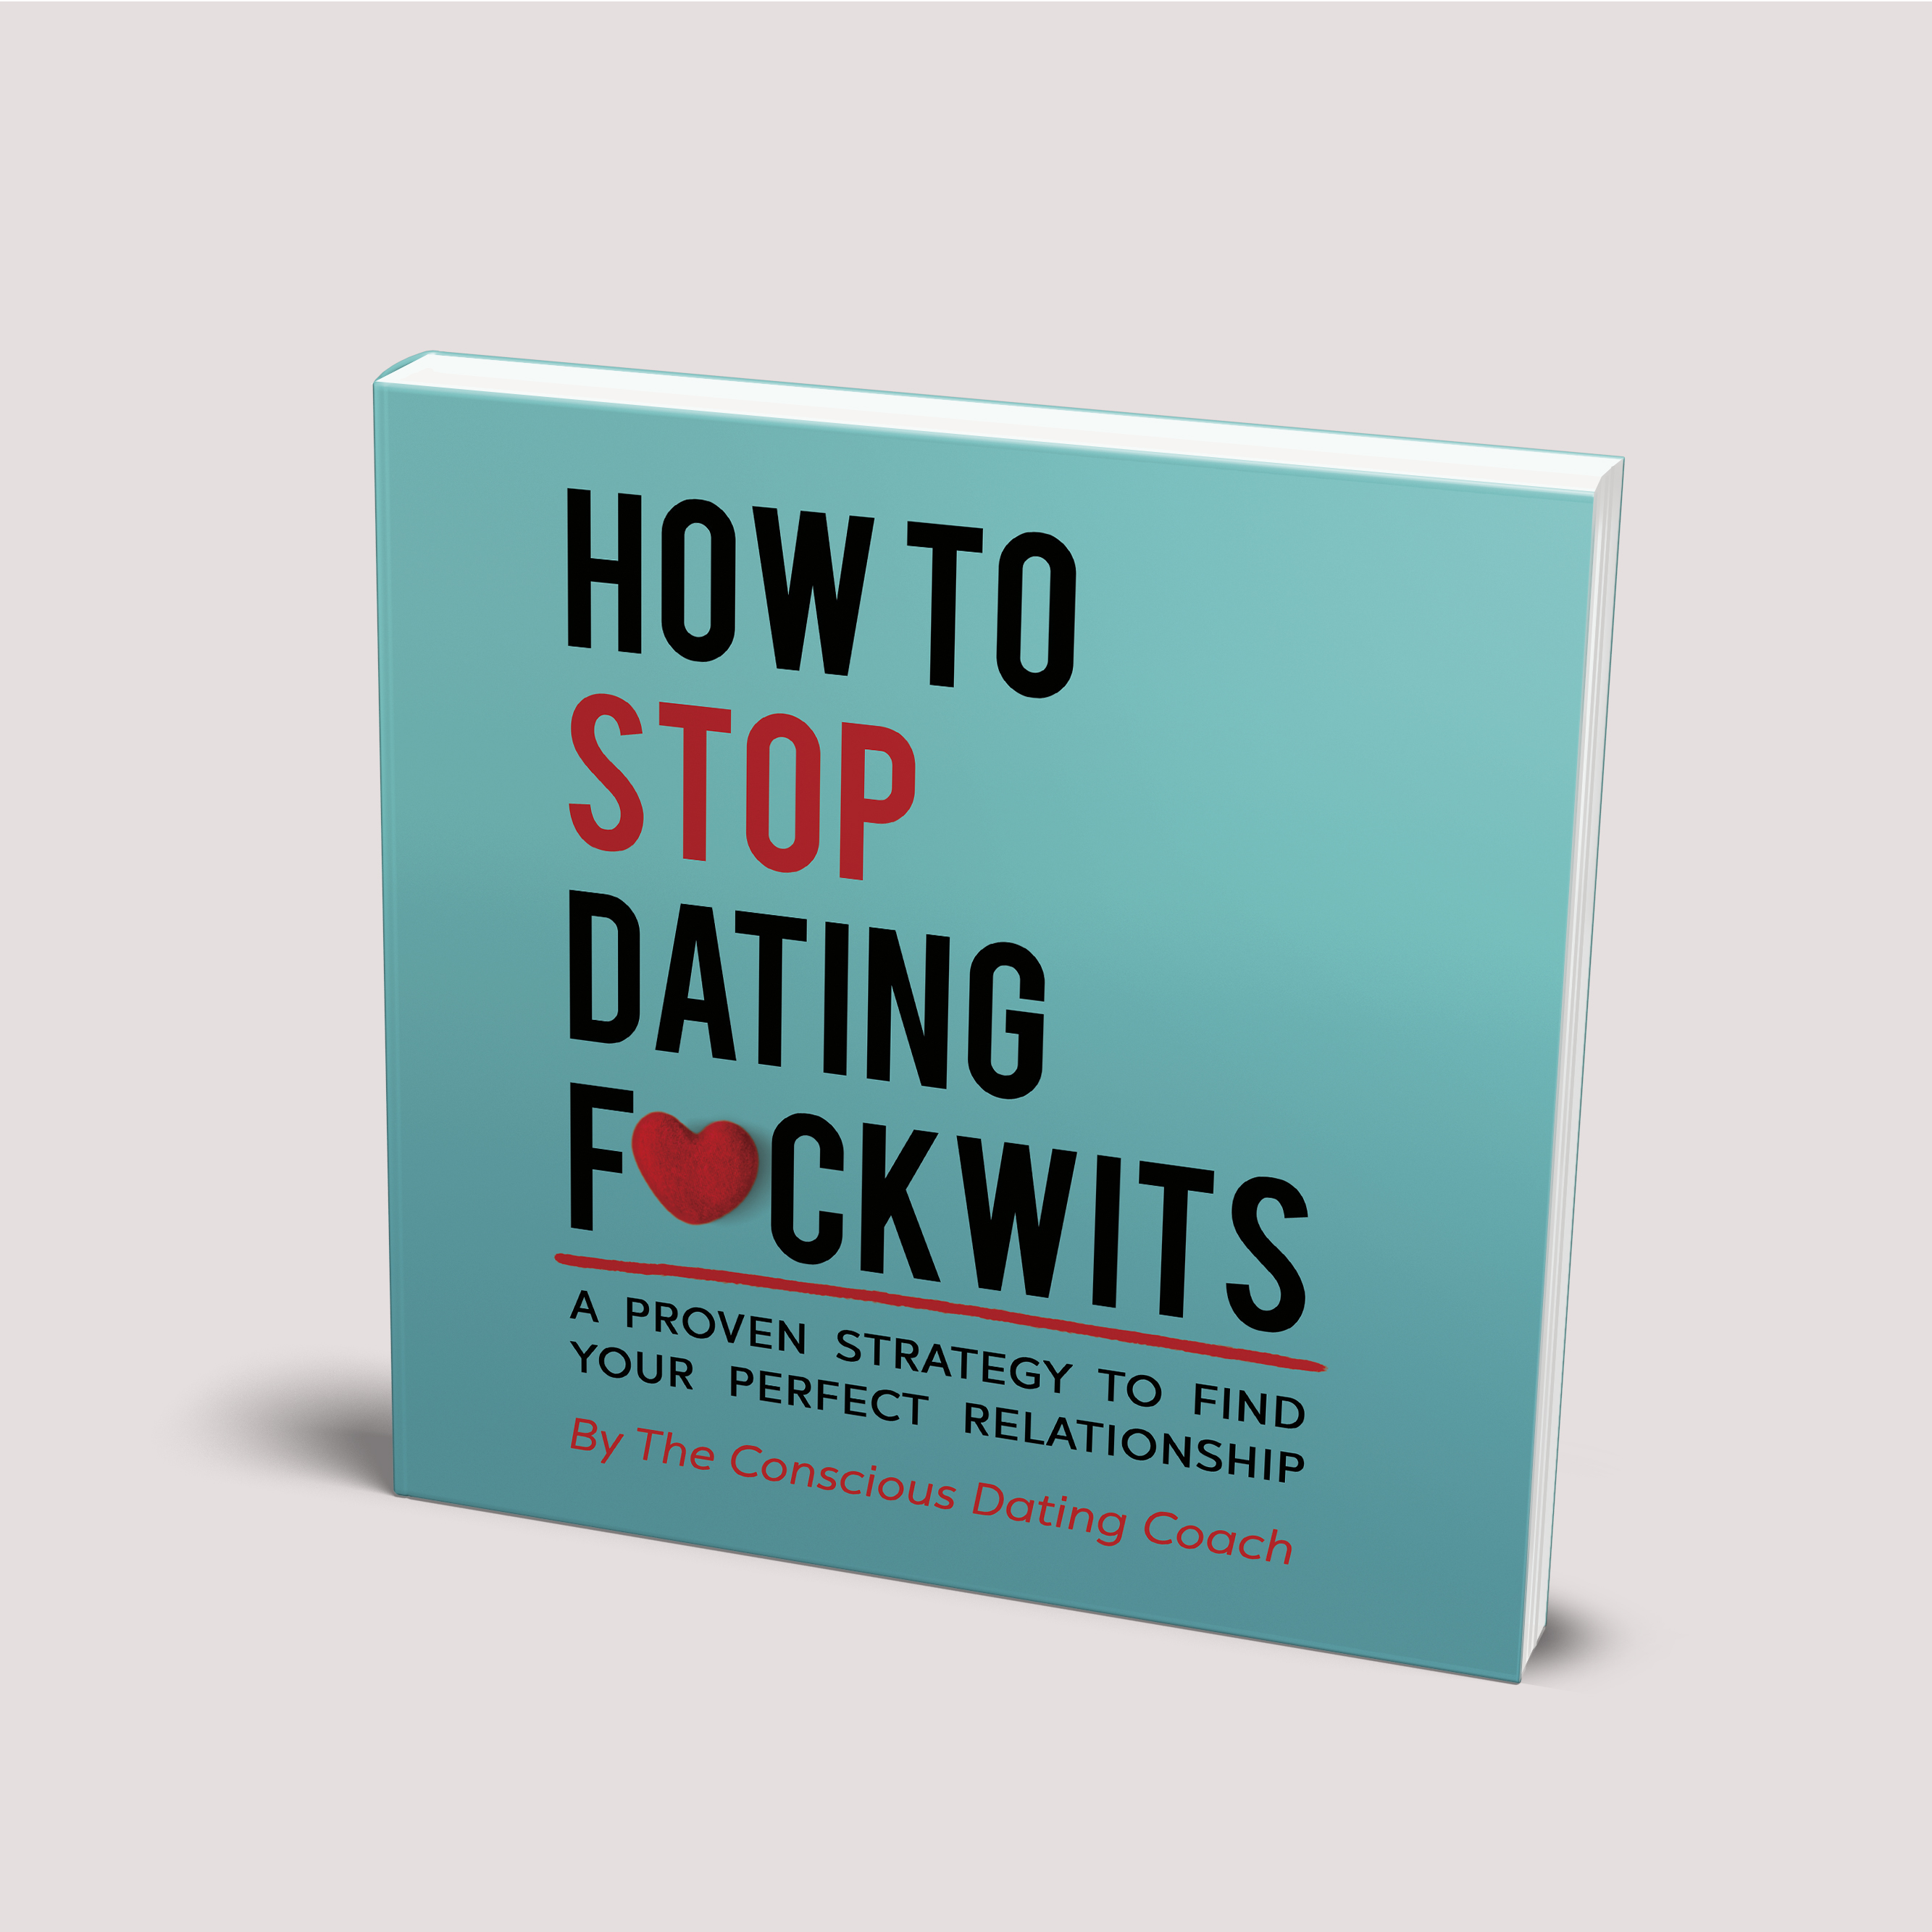 Amanda Robinson – How to stop dating f*wits!